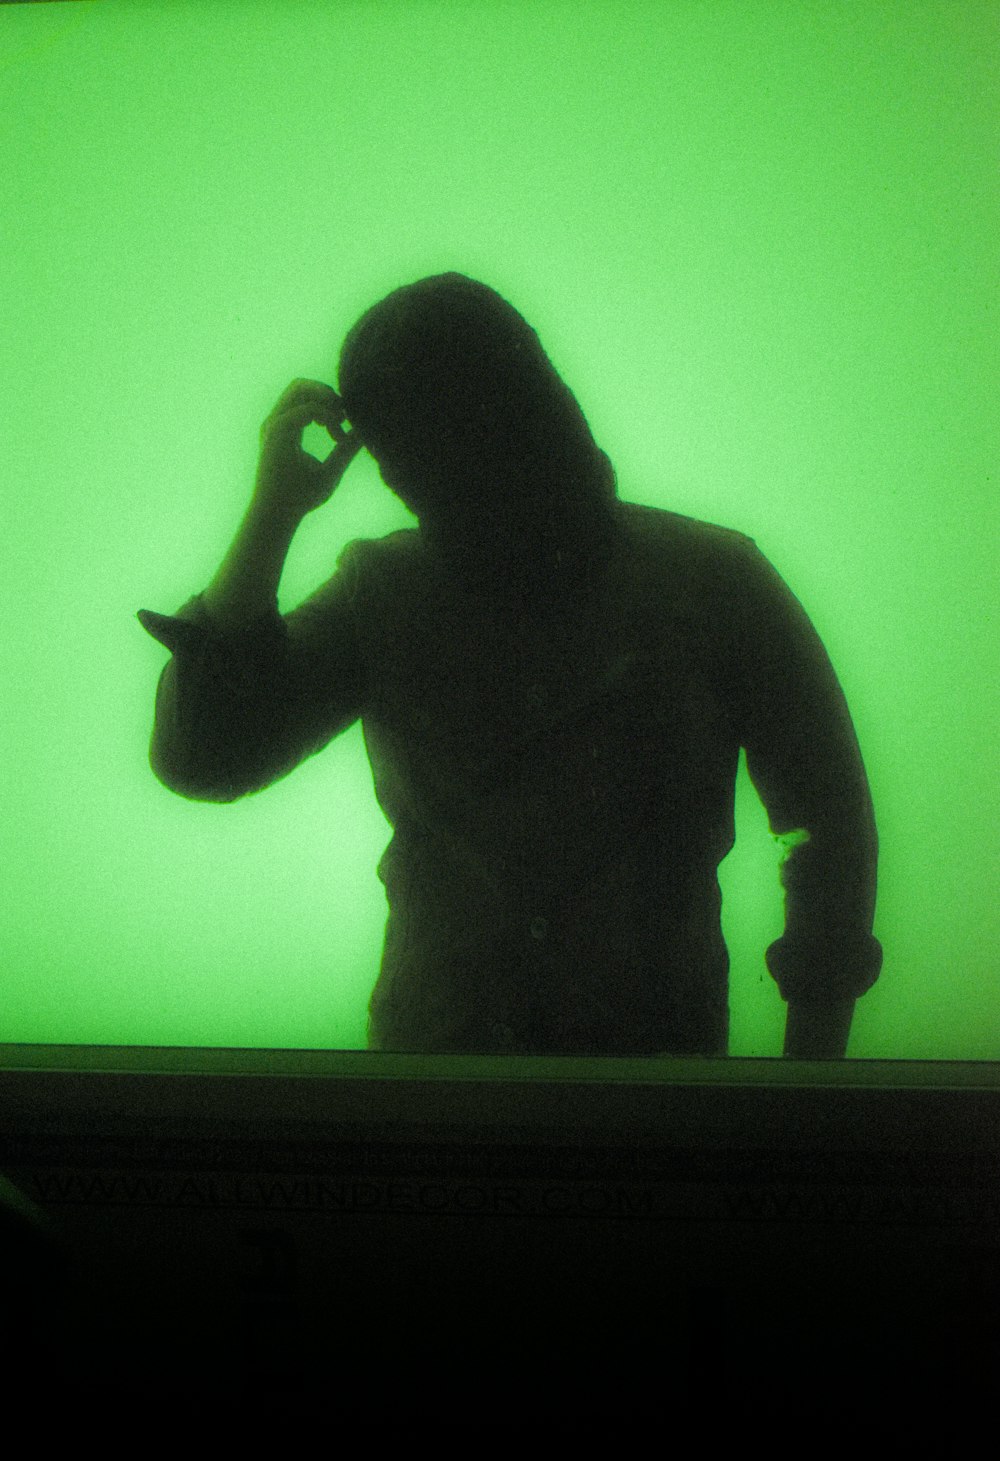 a person standing in front of a green screen